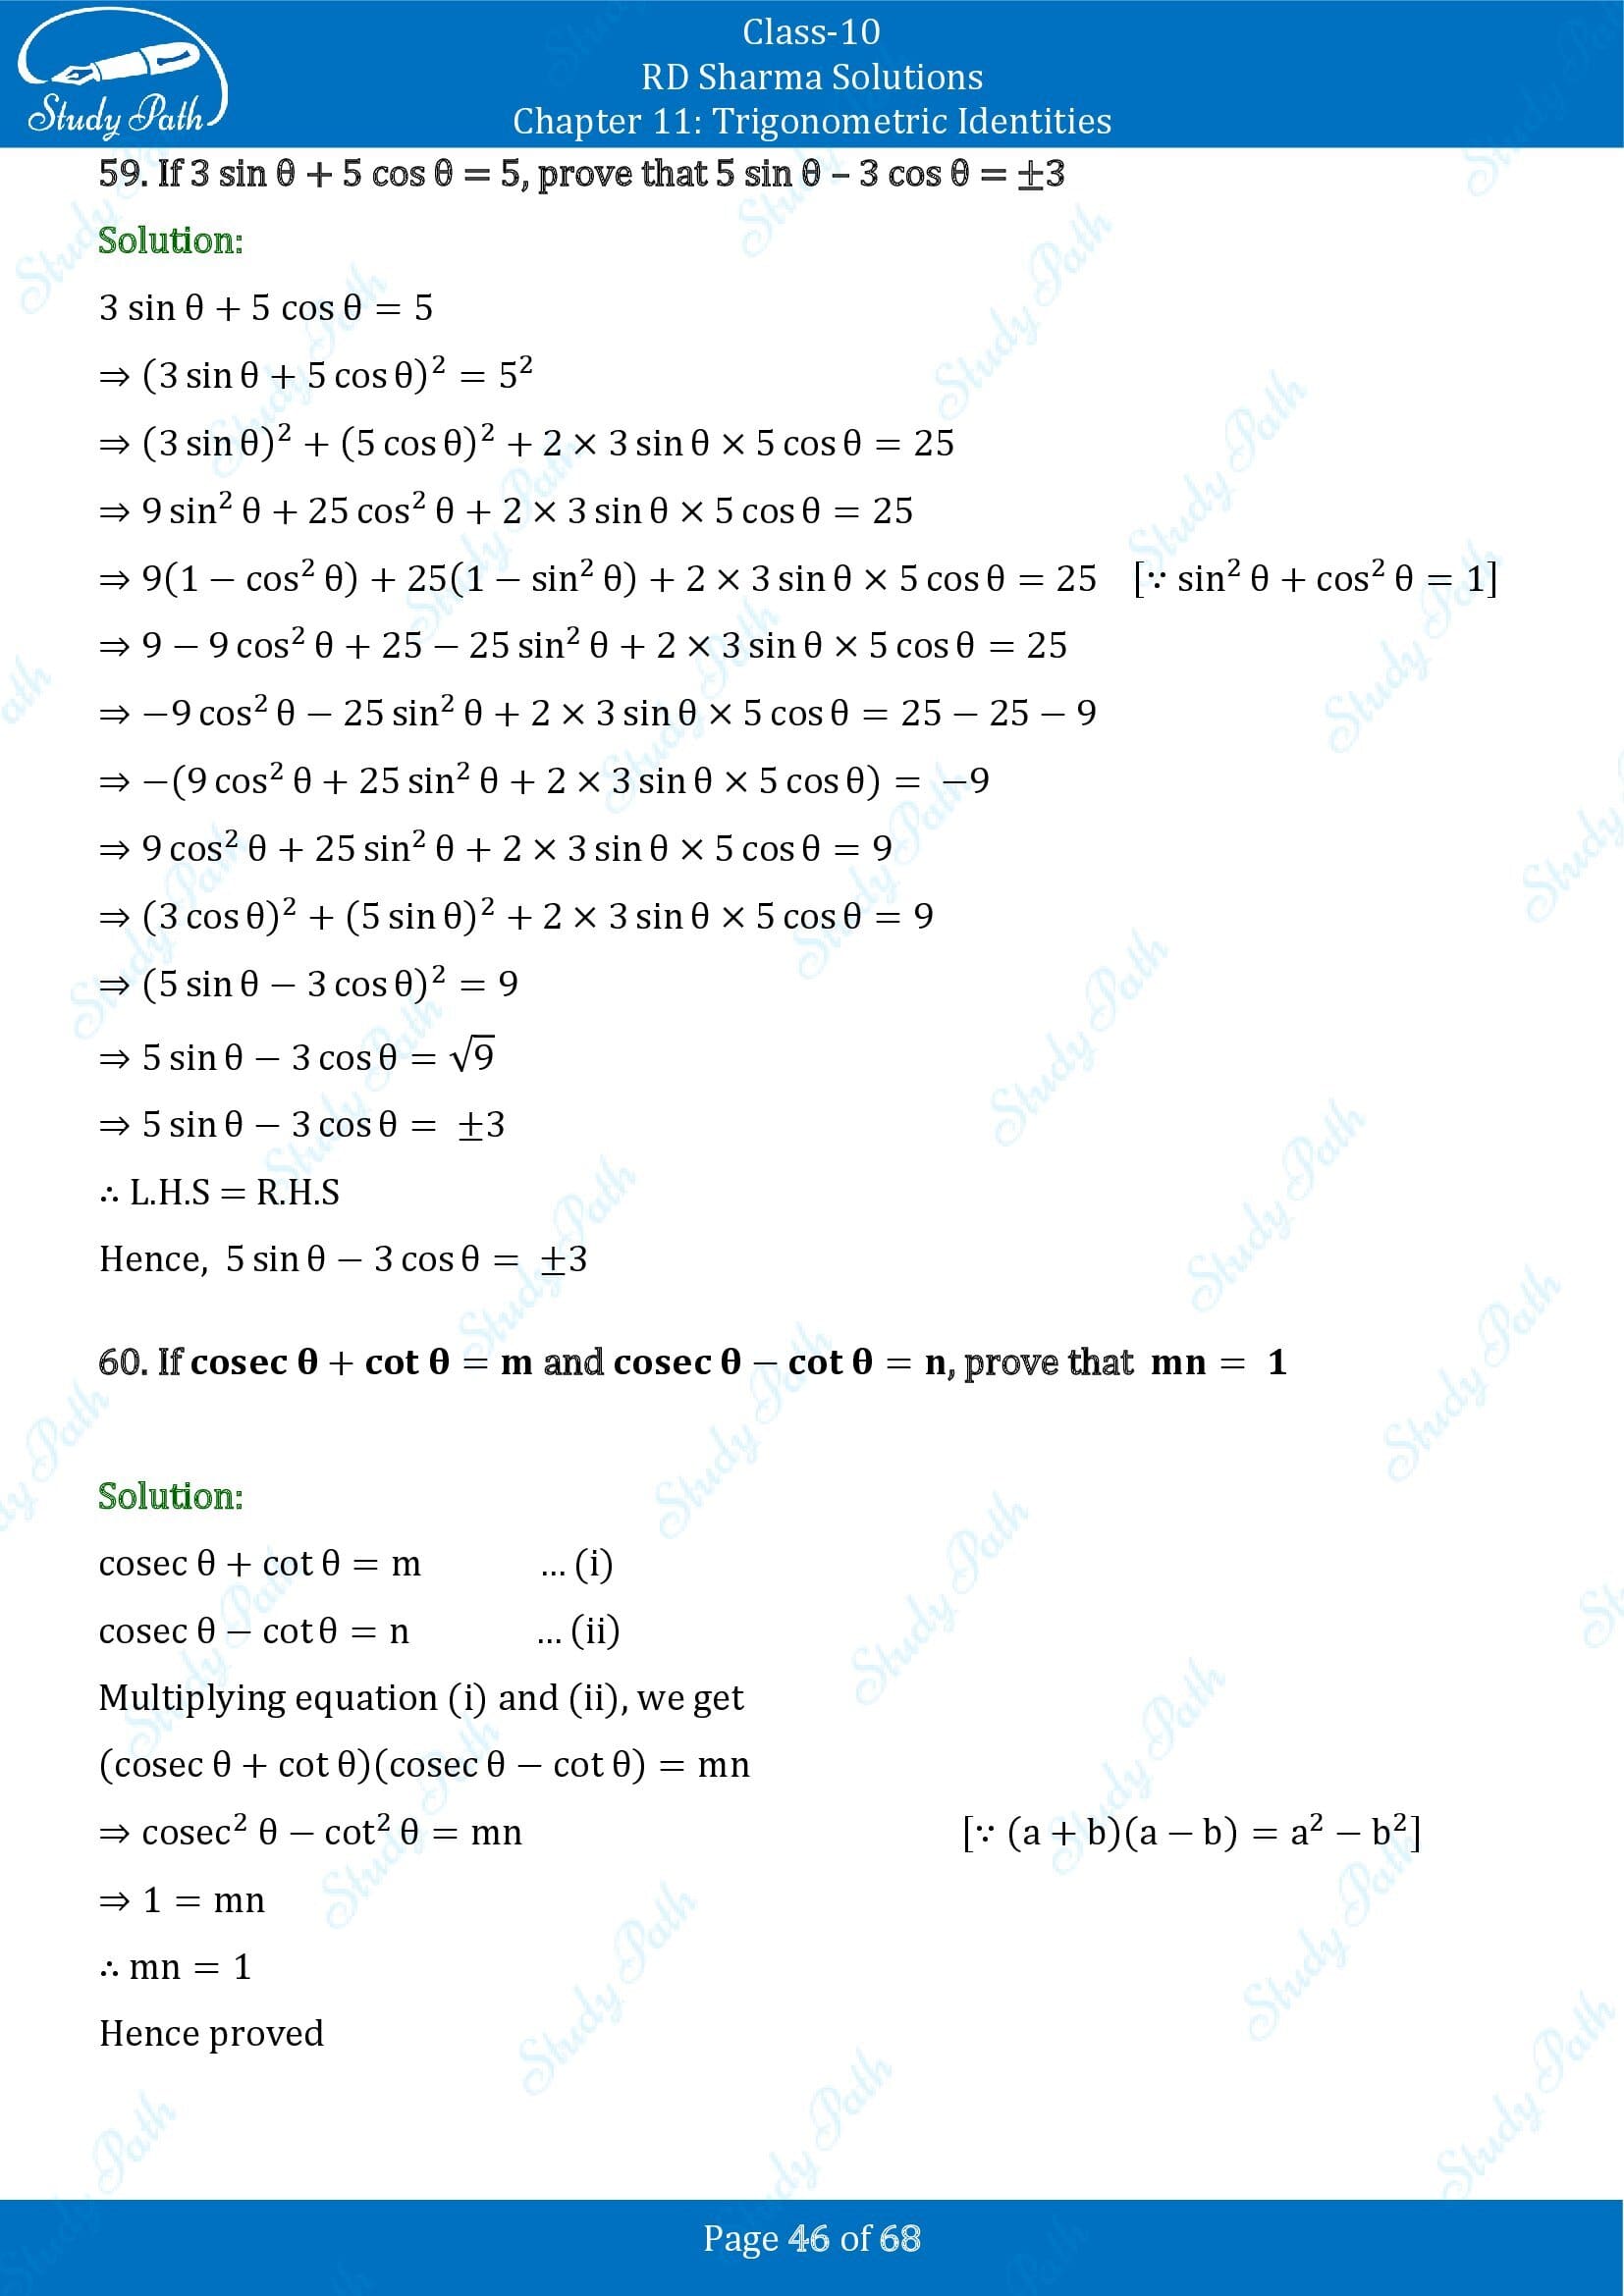 RD Sharma Solutions Class 10 Chapter 11 Trigonometric Identities Exercise 11.1 00046